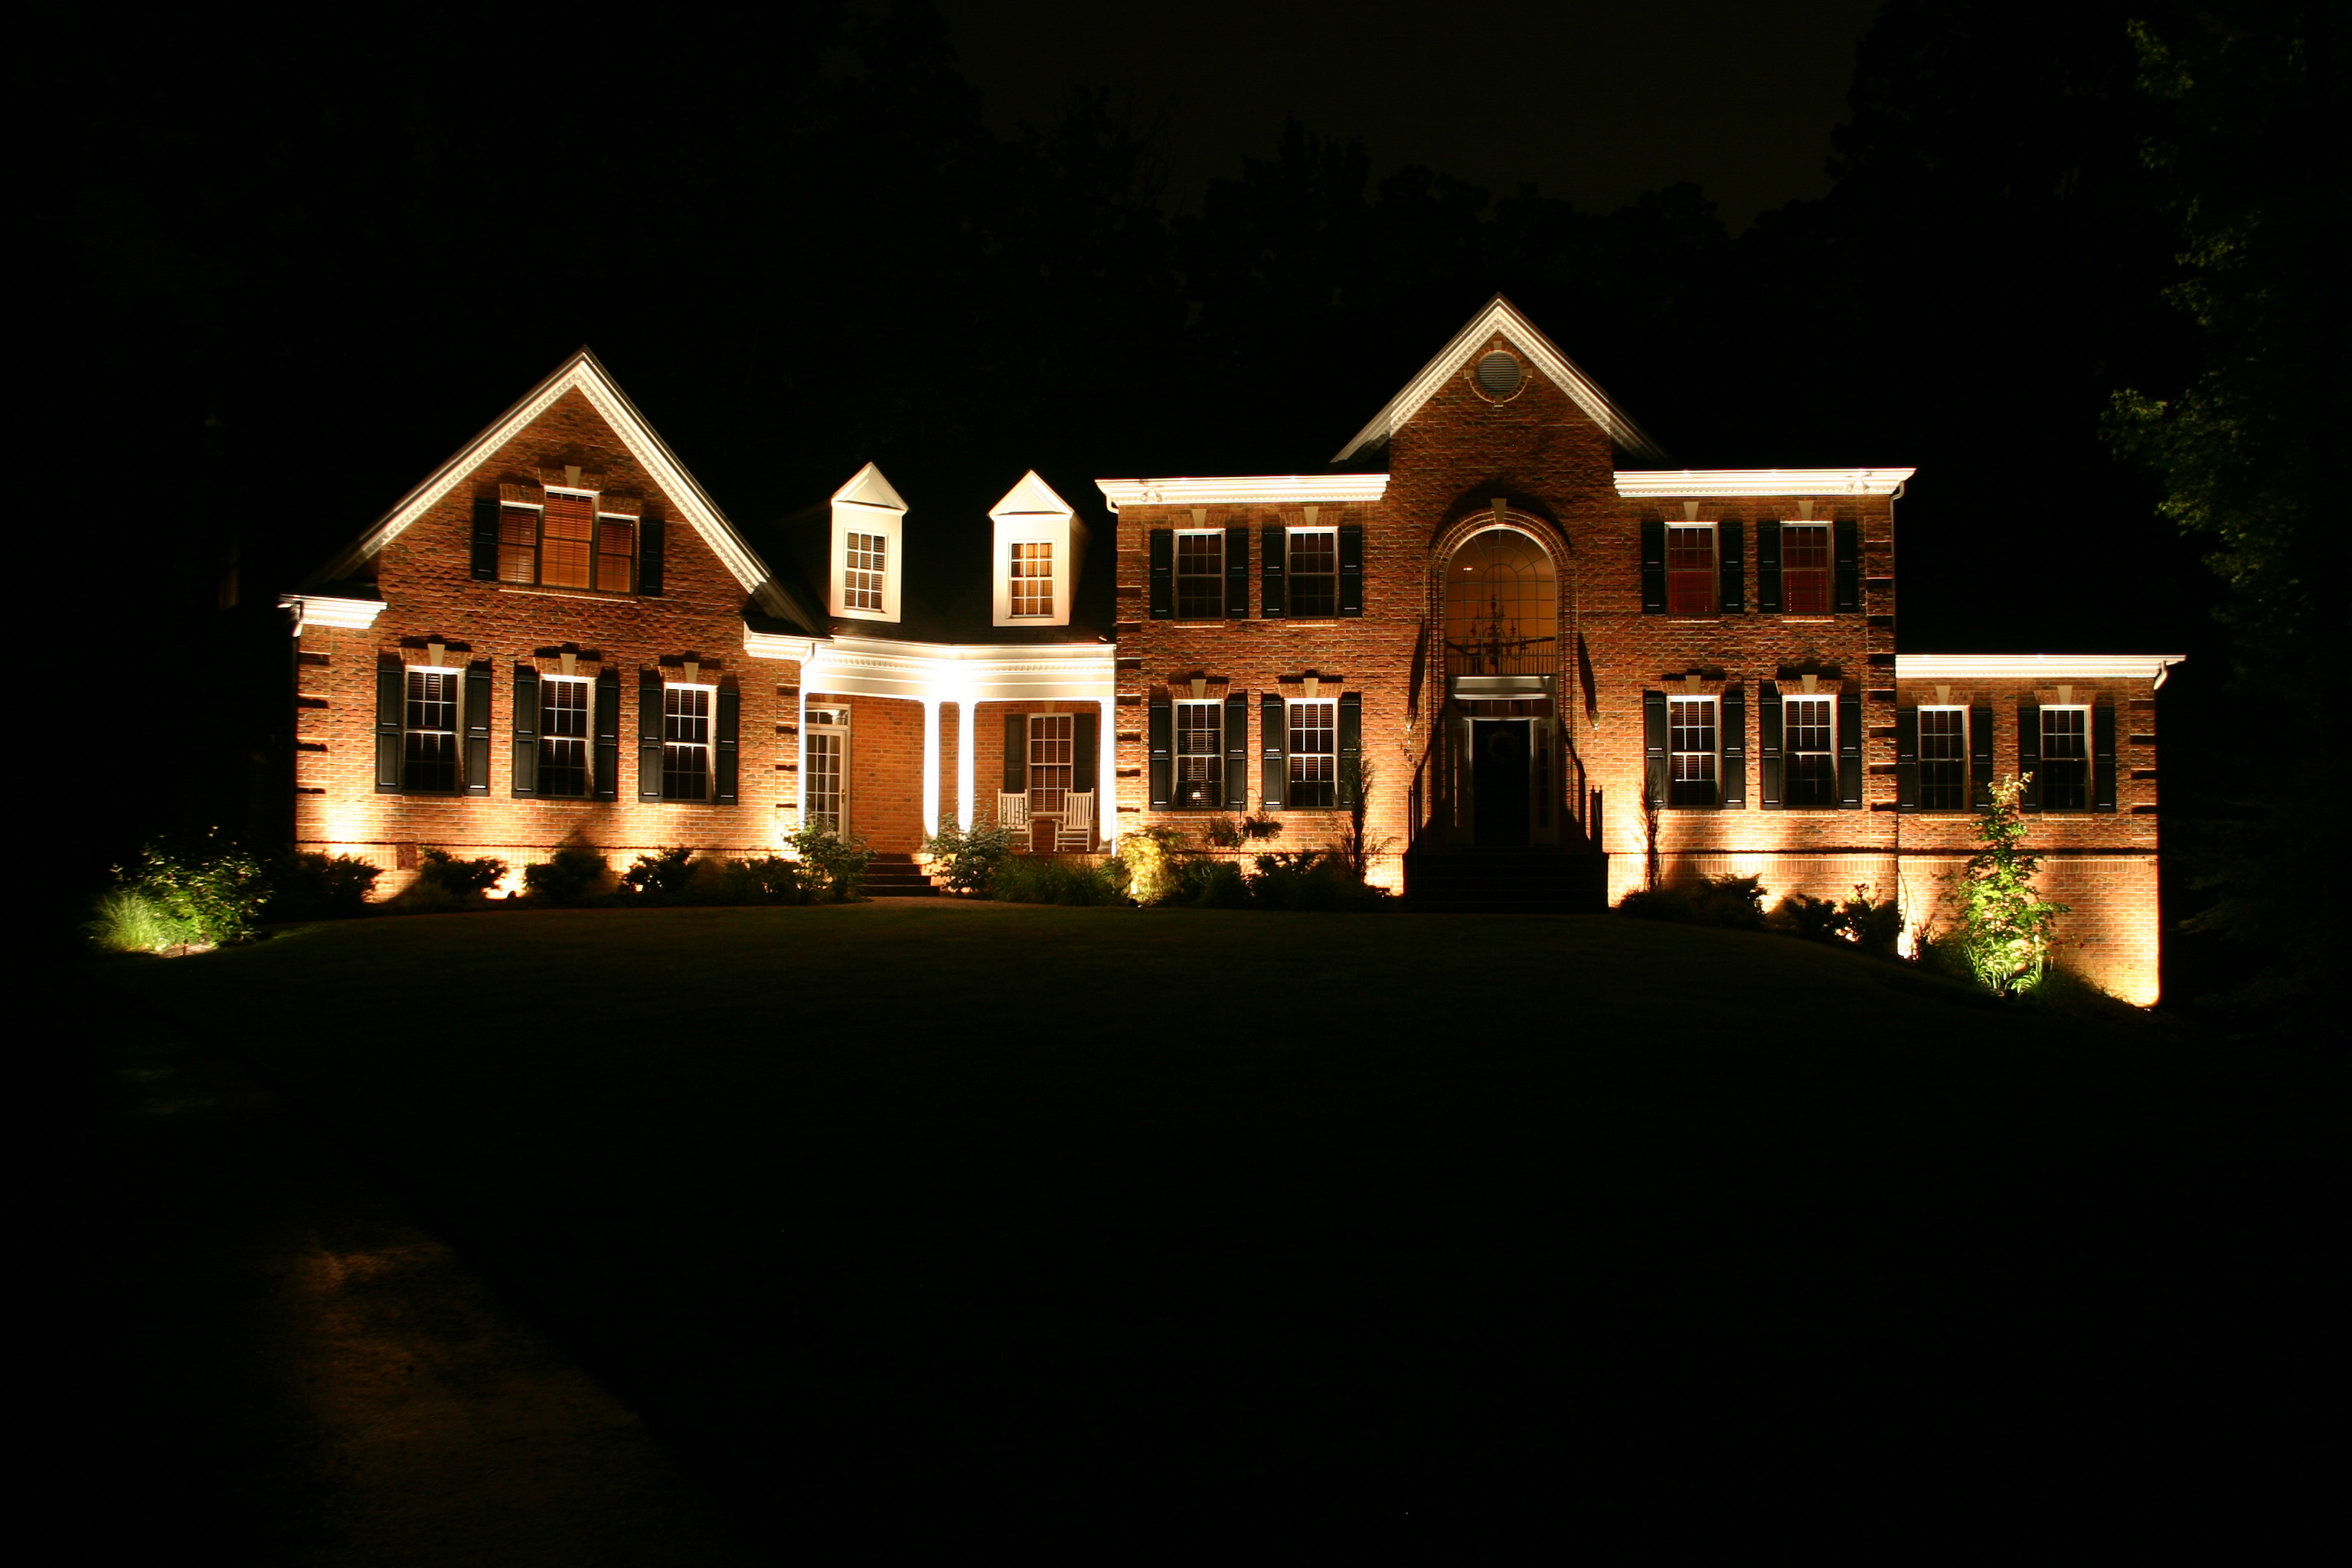 Front of home lighting